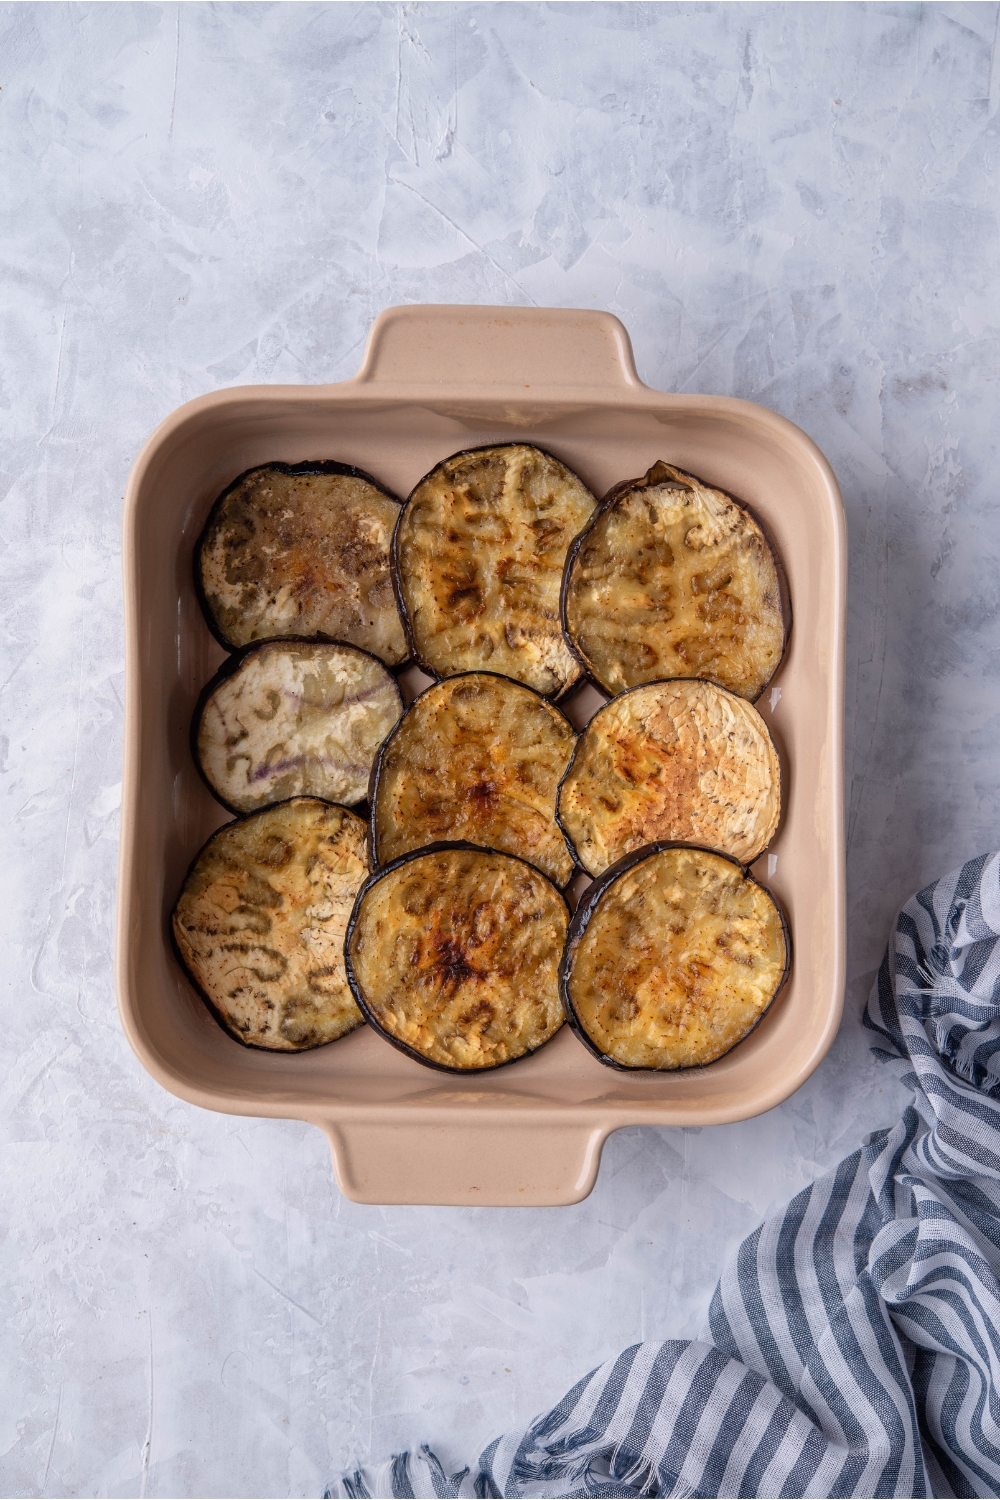 Three rows of three baked eggplant slices in a casserole dish.